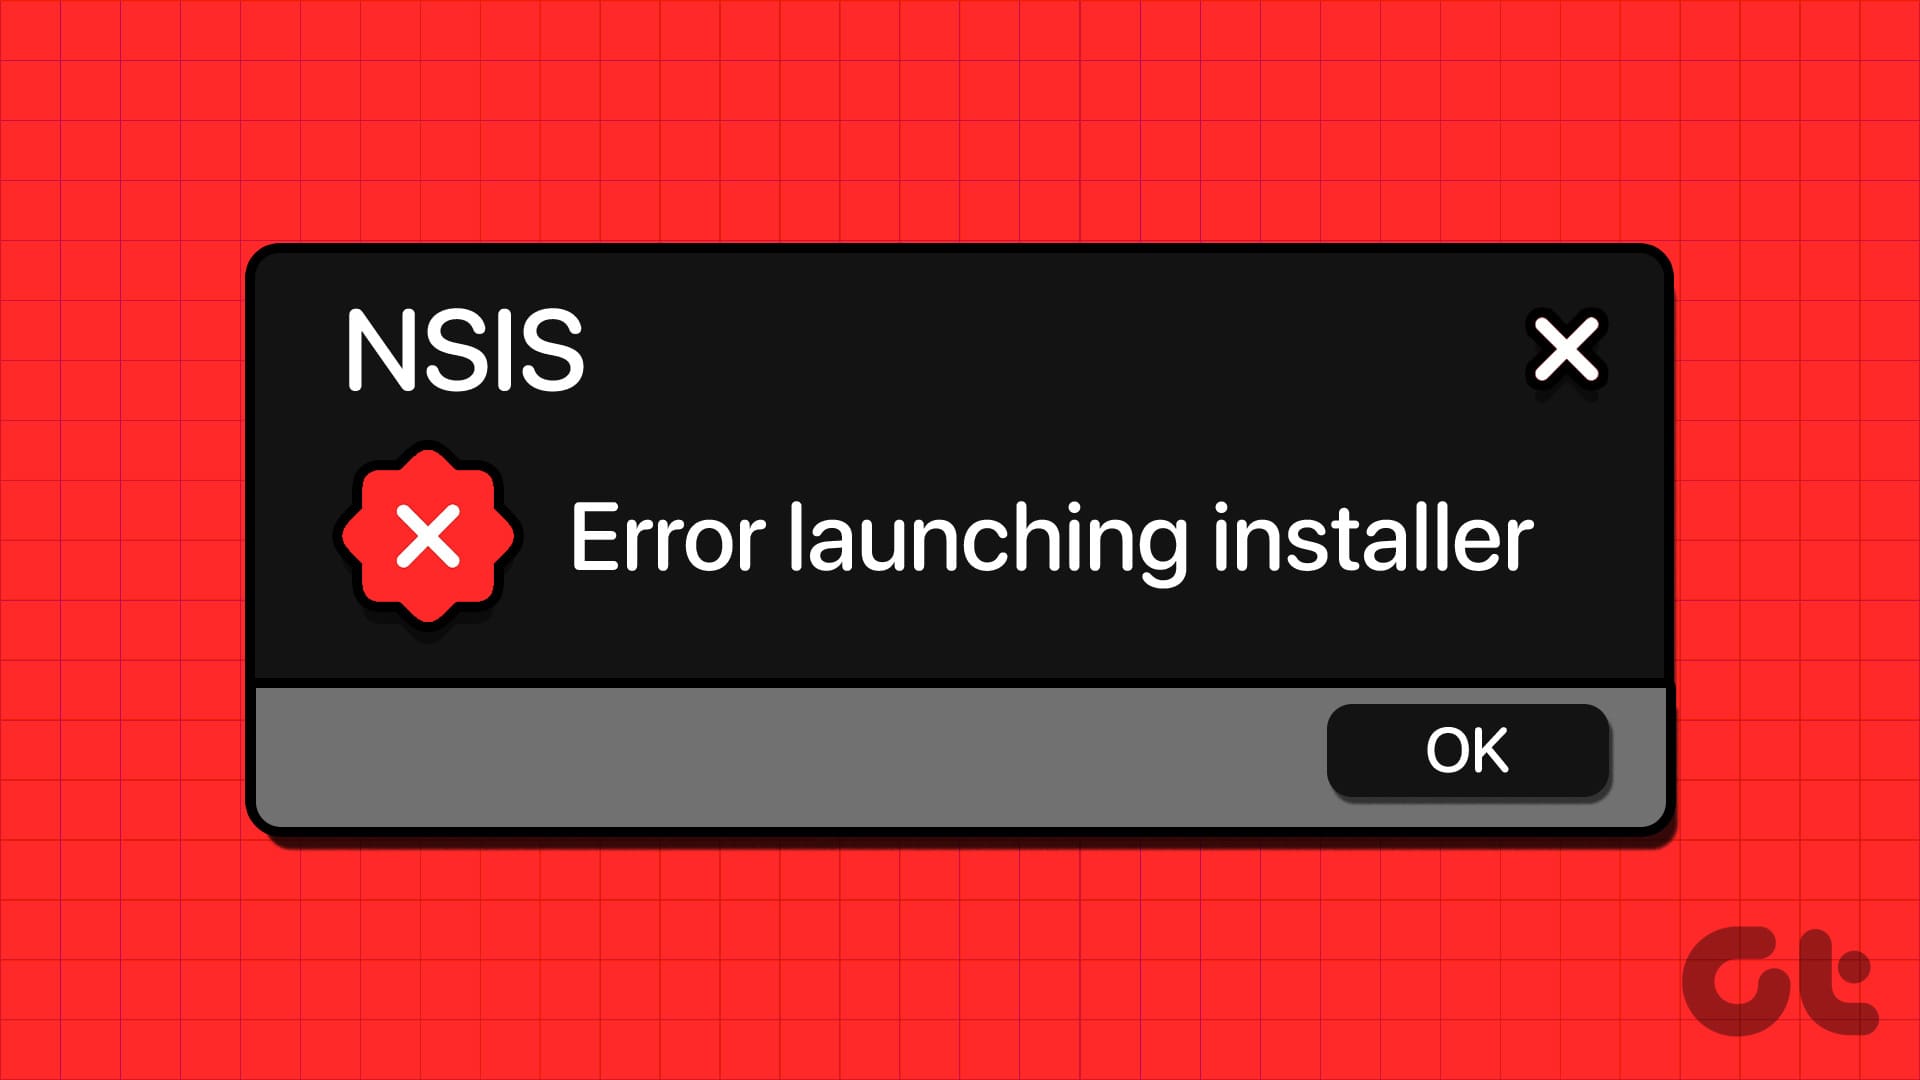 Top 8 Fixes For NSIS ‘Error Launching Installer’ Issue in Windows 10 and 11